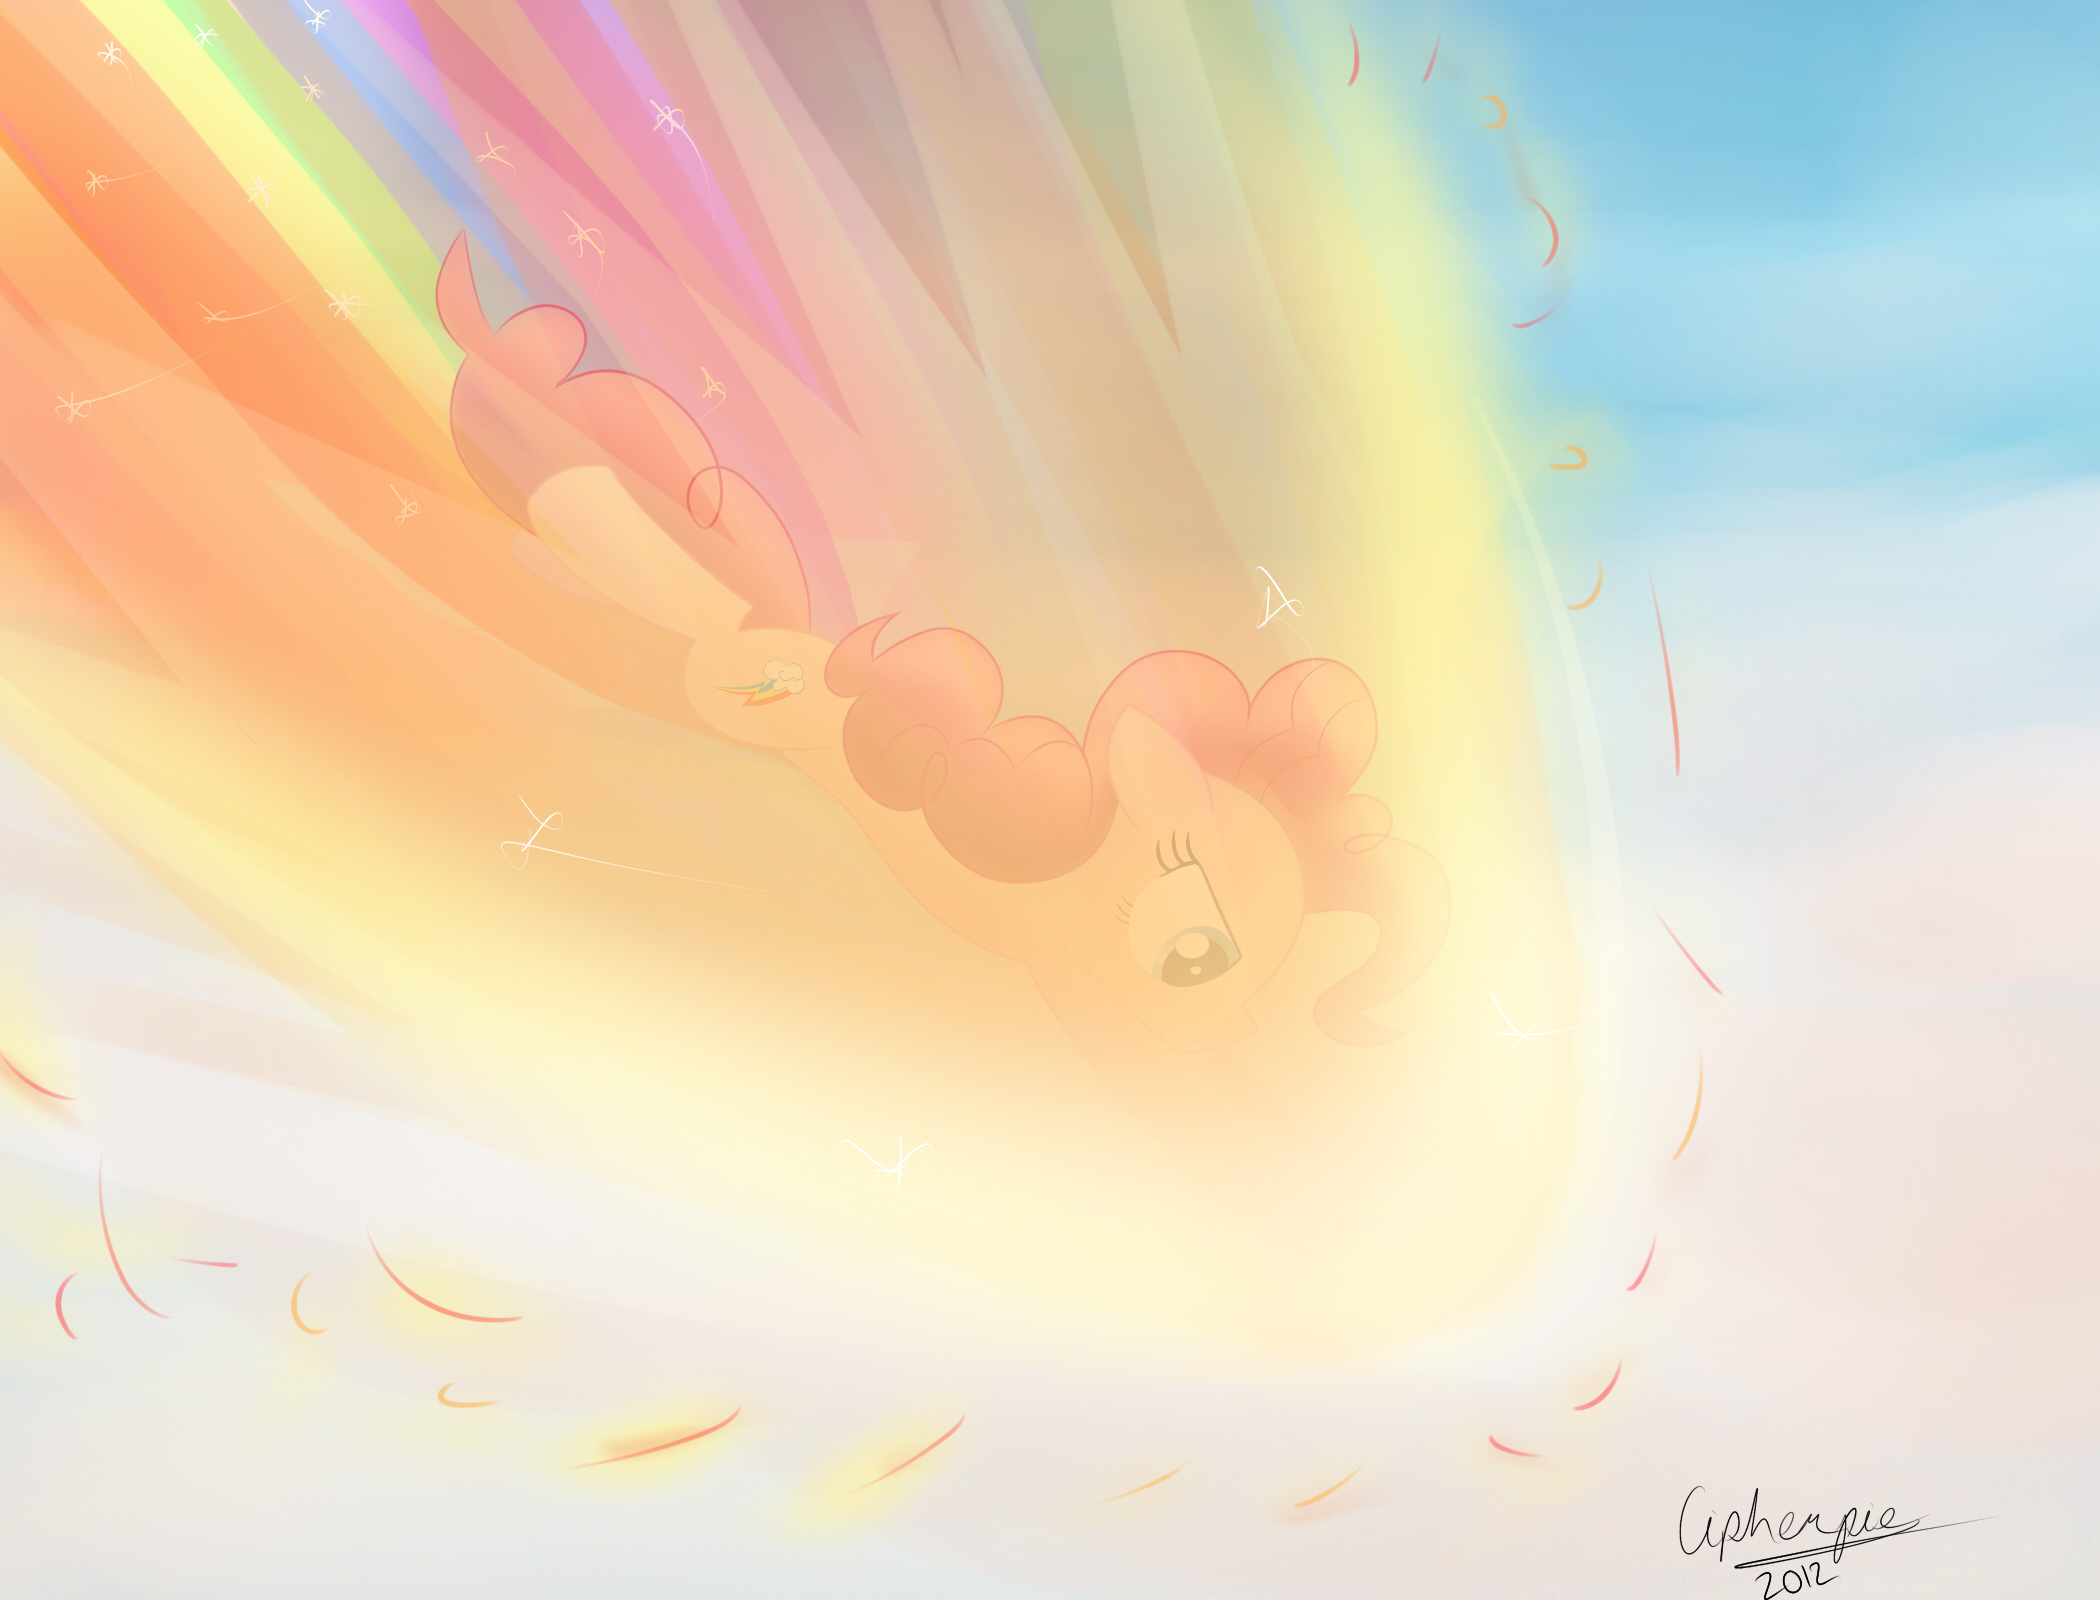 What If Pinkie Pie Did the Sonic Rainboom? by BlackGryph0n and cipherpie